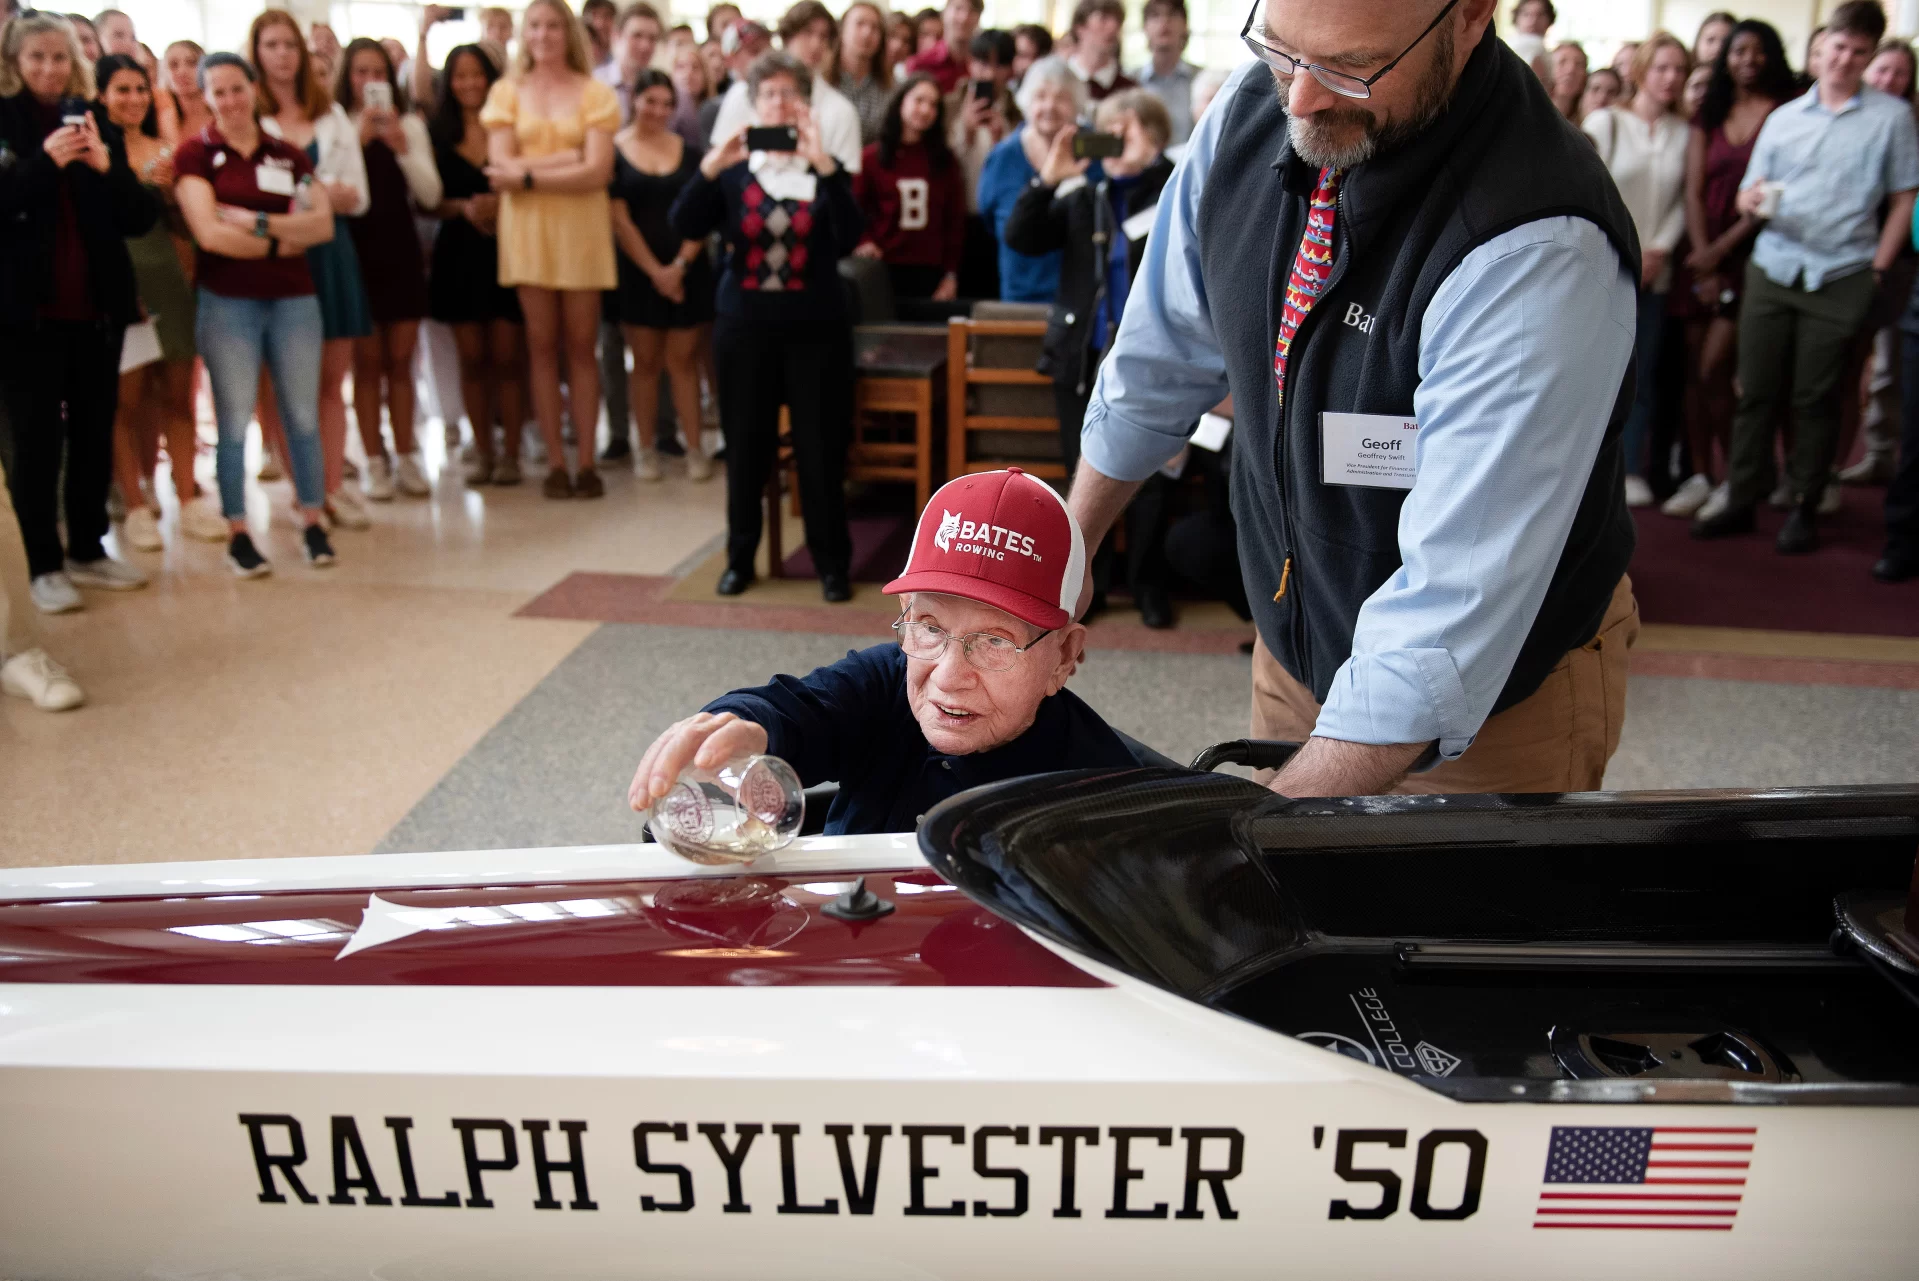 Ralph Sylvester ’50 christens the new rowing shell at Perry Atrium in Pettengill Hall on April 29, 2023. Bates Rowing Head Coach Peter Steenstra presented Sylvester with a blade during the dedication ceremony making Sylvester the only non-rower to receive one.